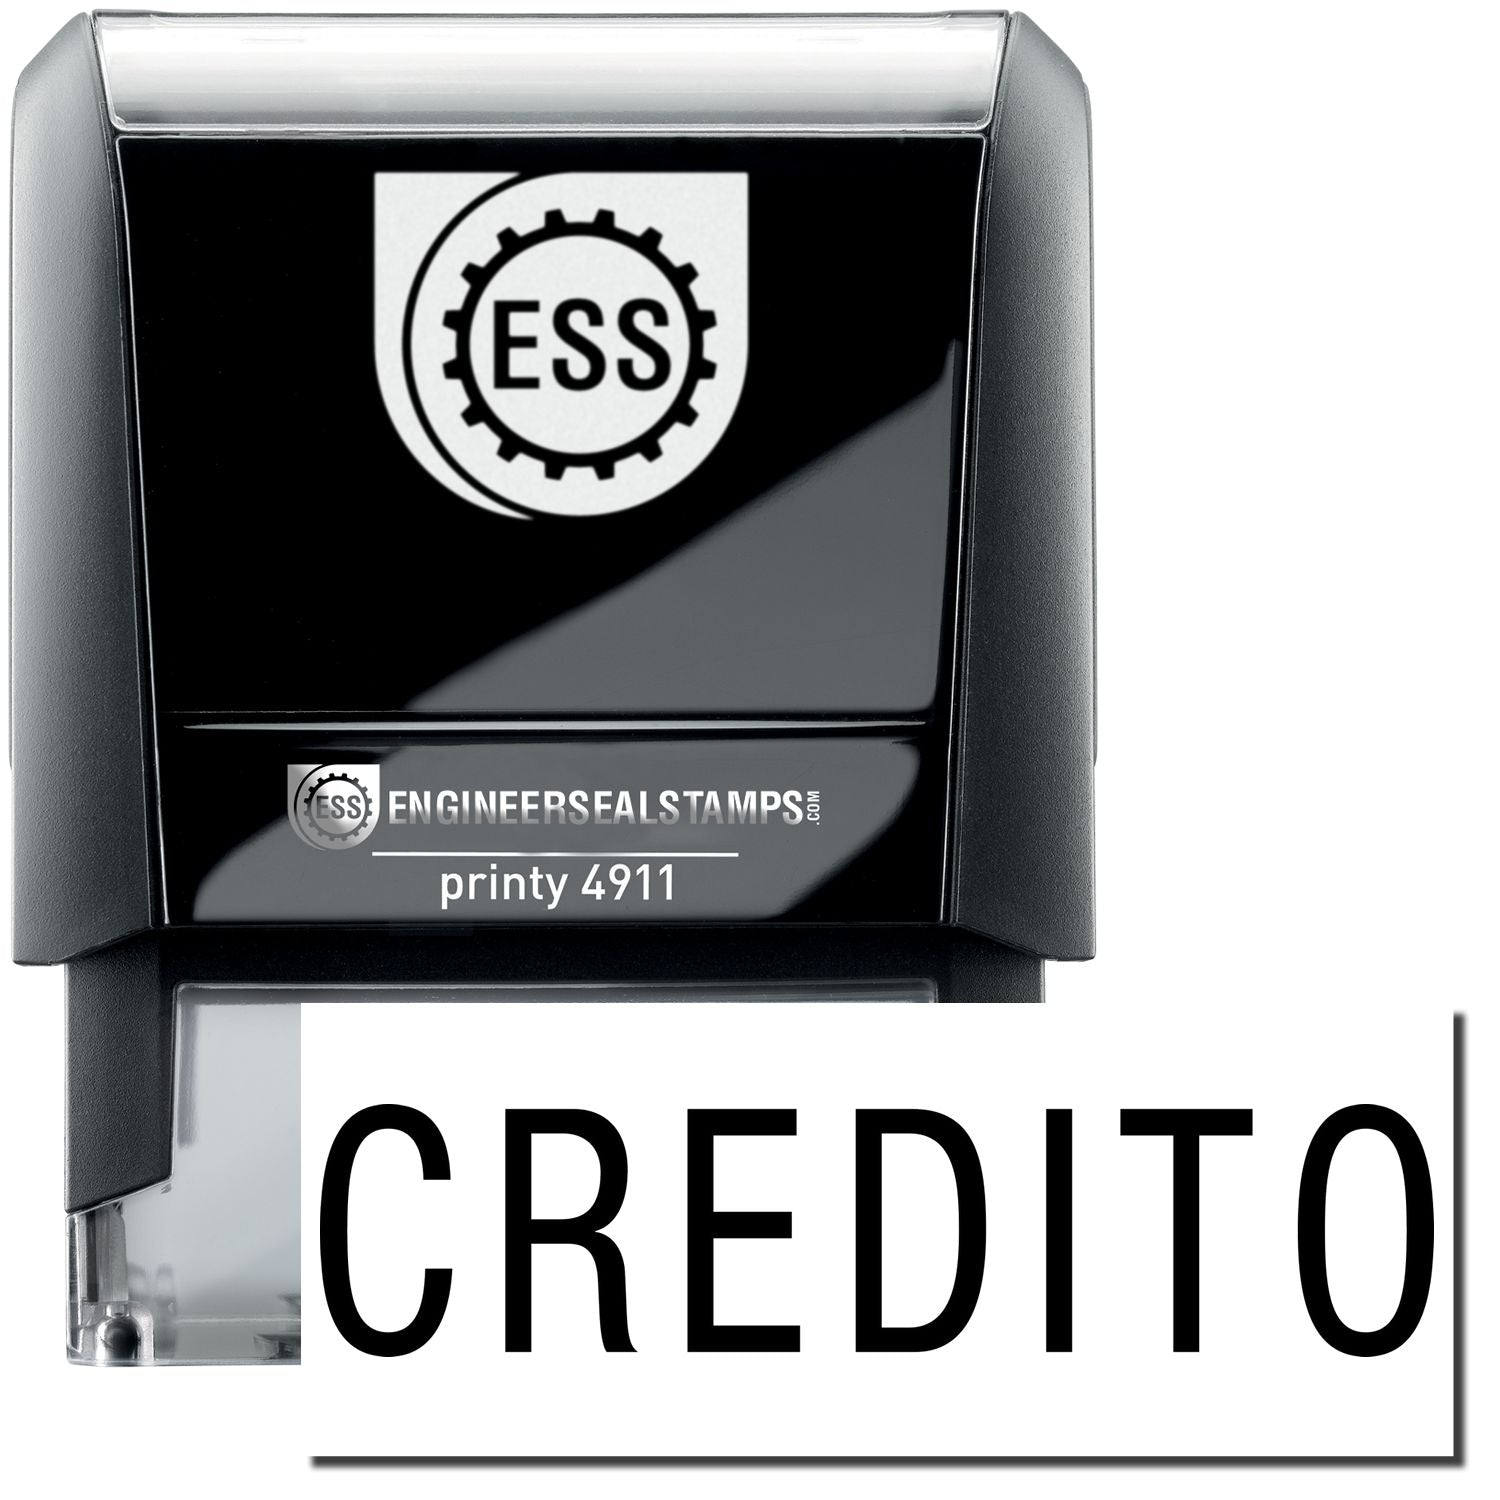 A self-inking stamp with a stamped image showing how the text "CREDITO" is displayed after stamping.